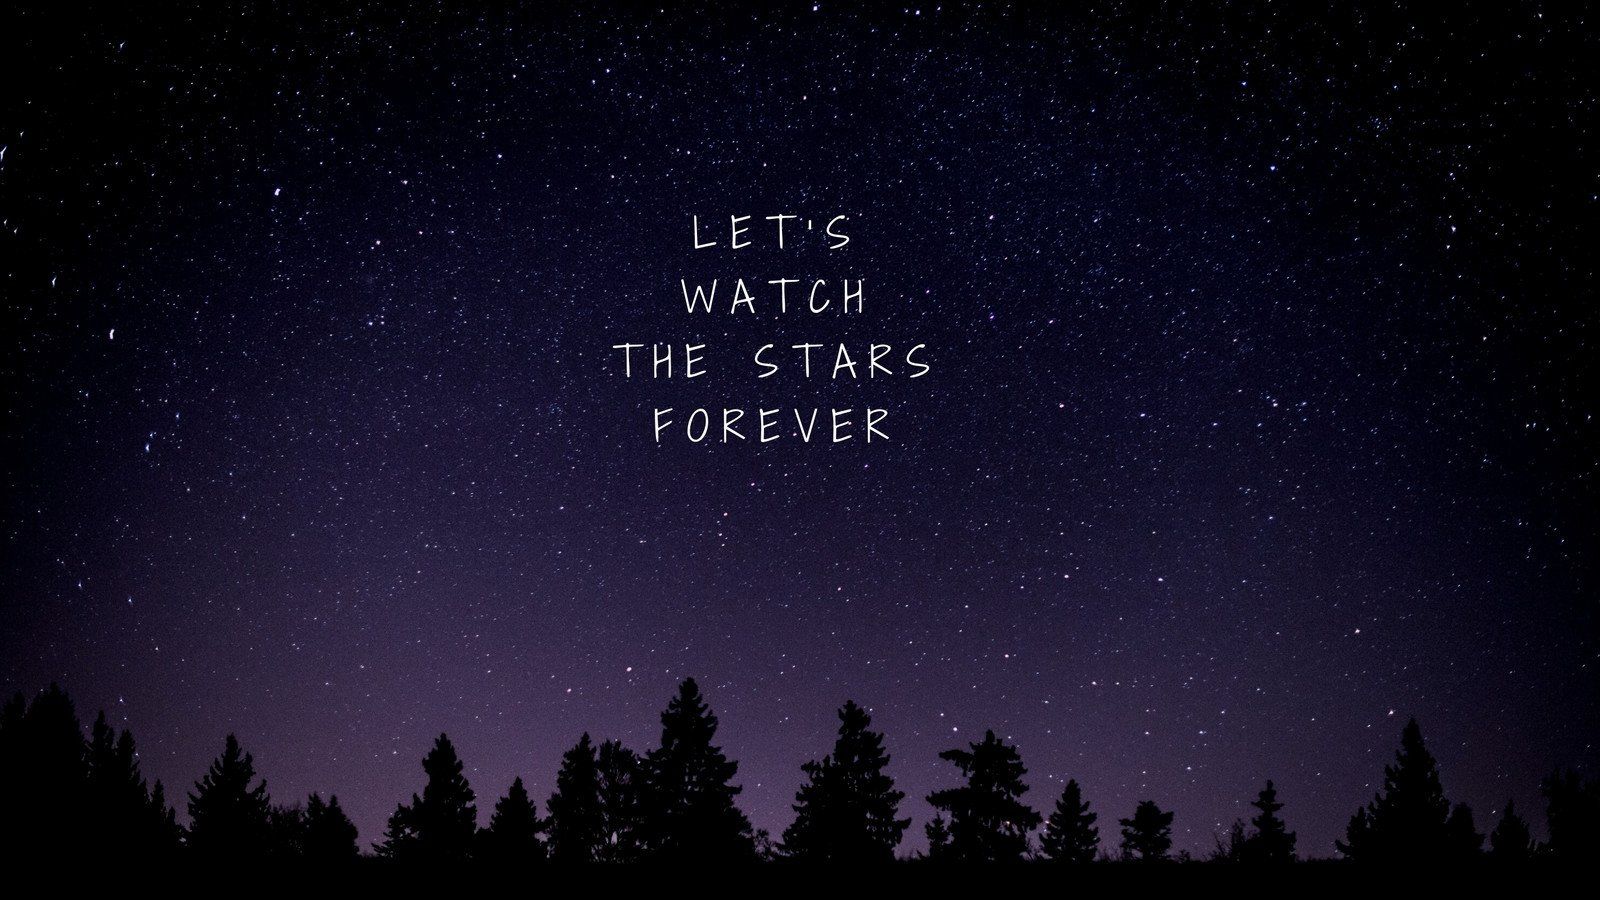 Let's watch the stars forever. - Space